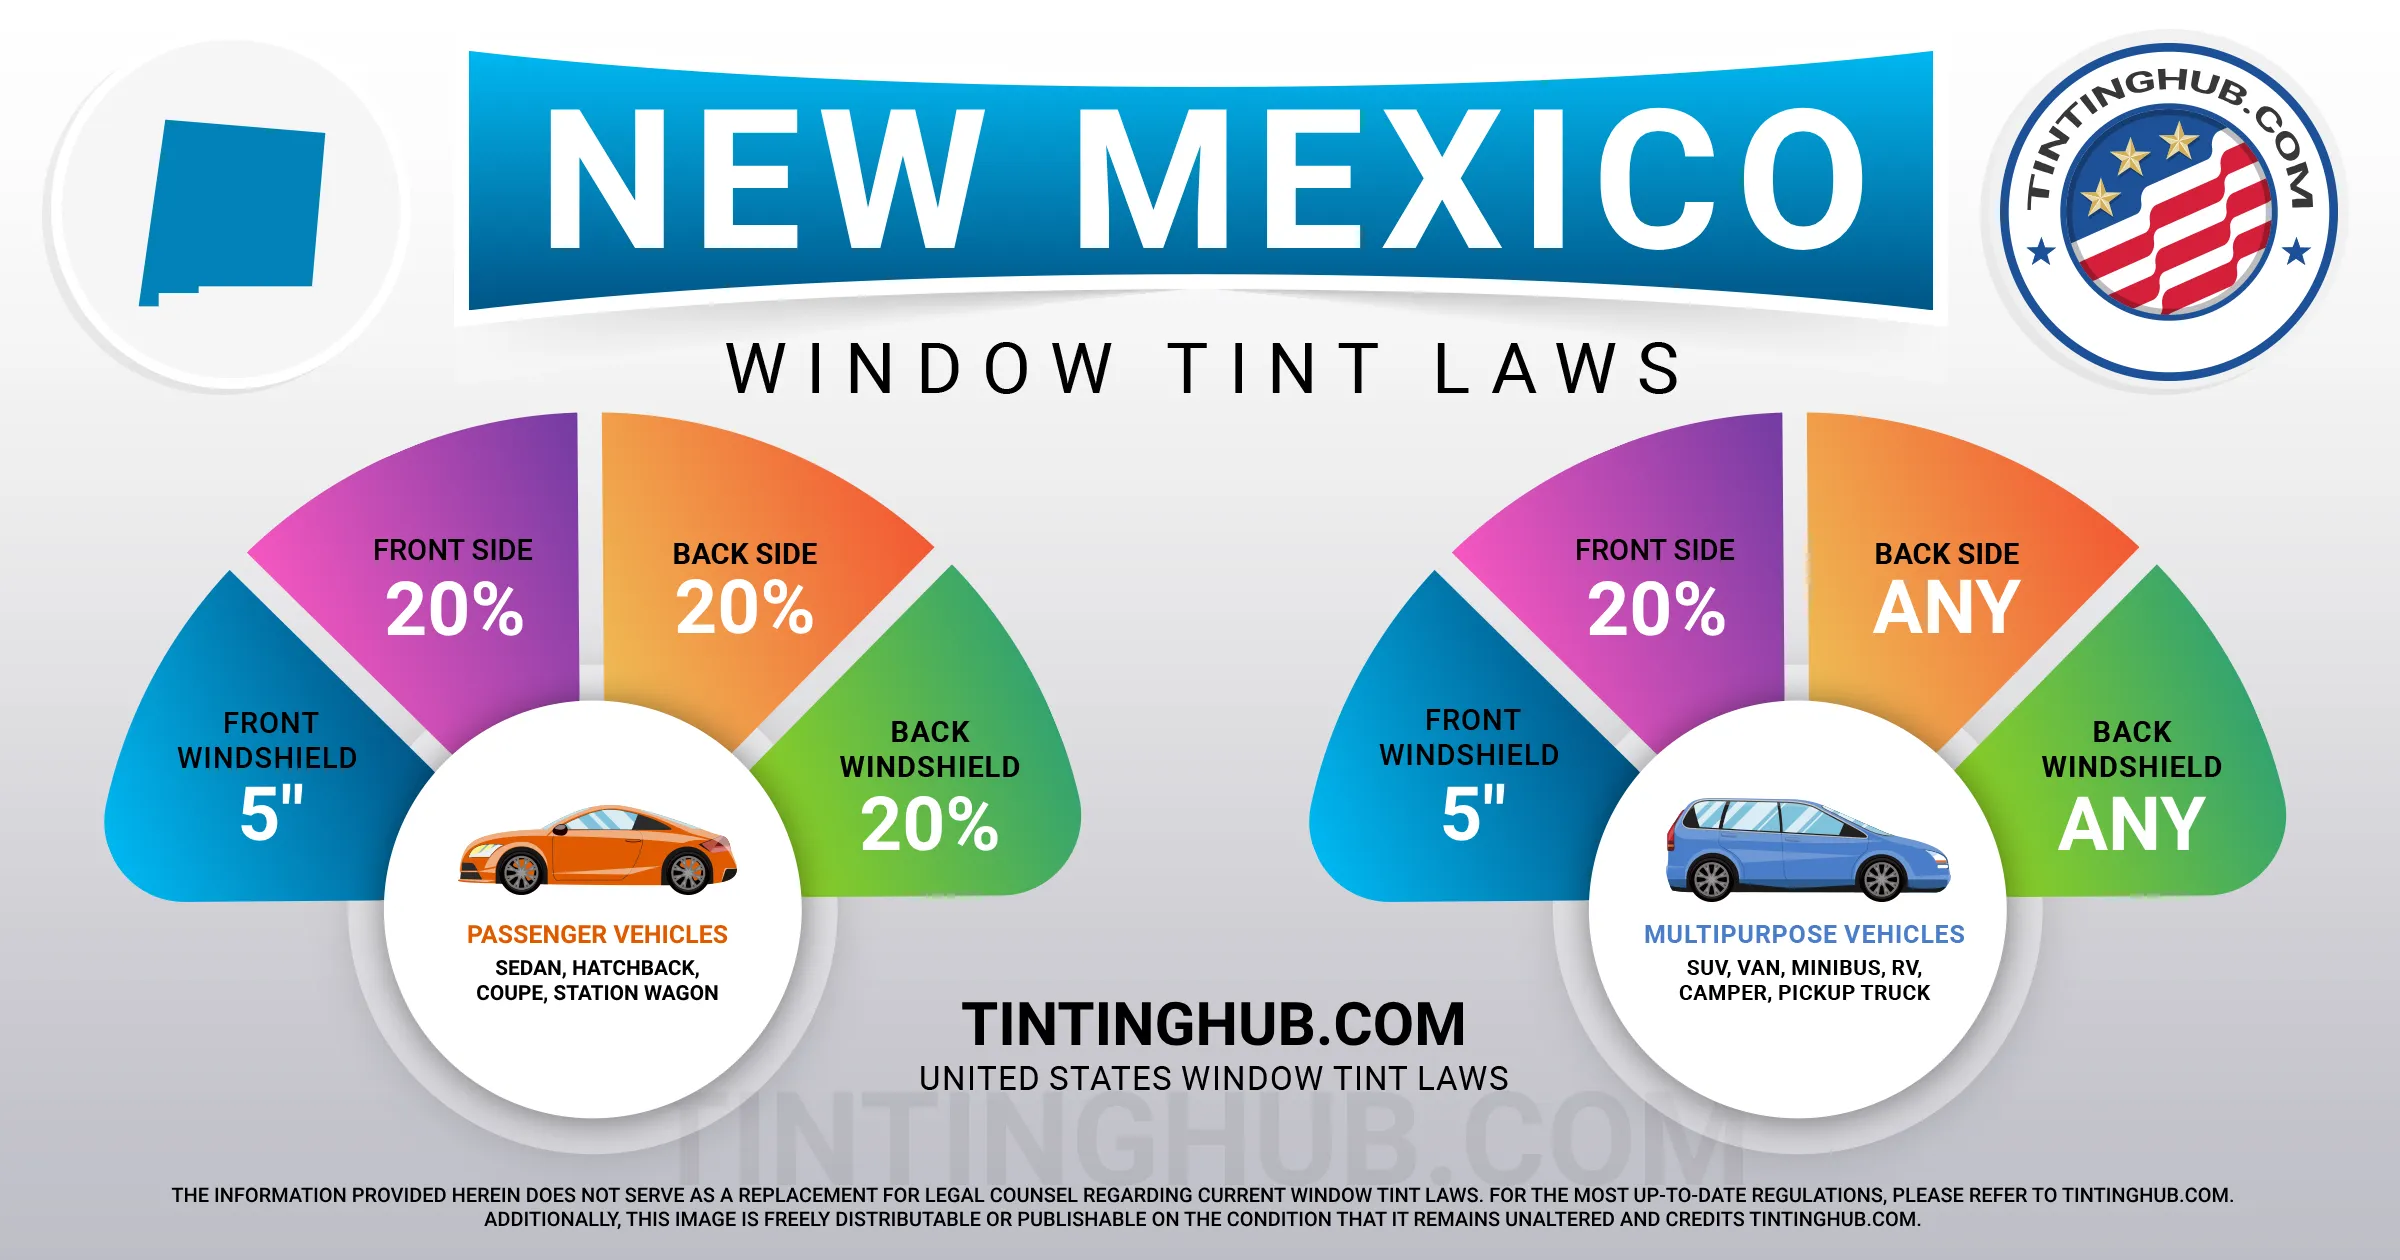 New Mexico Automobile Window Tint Laws